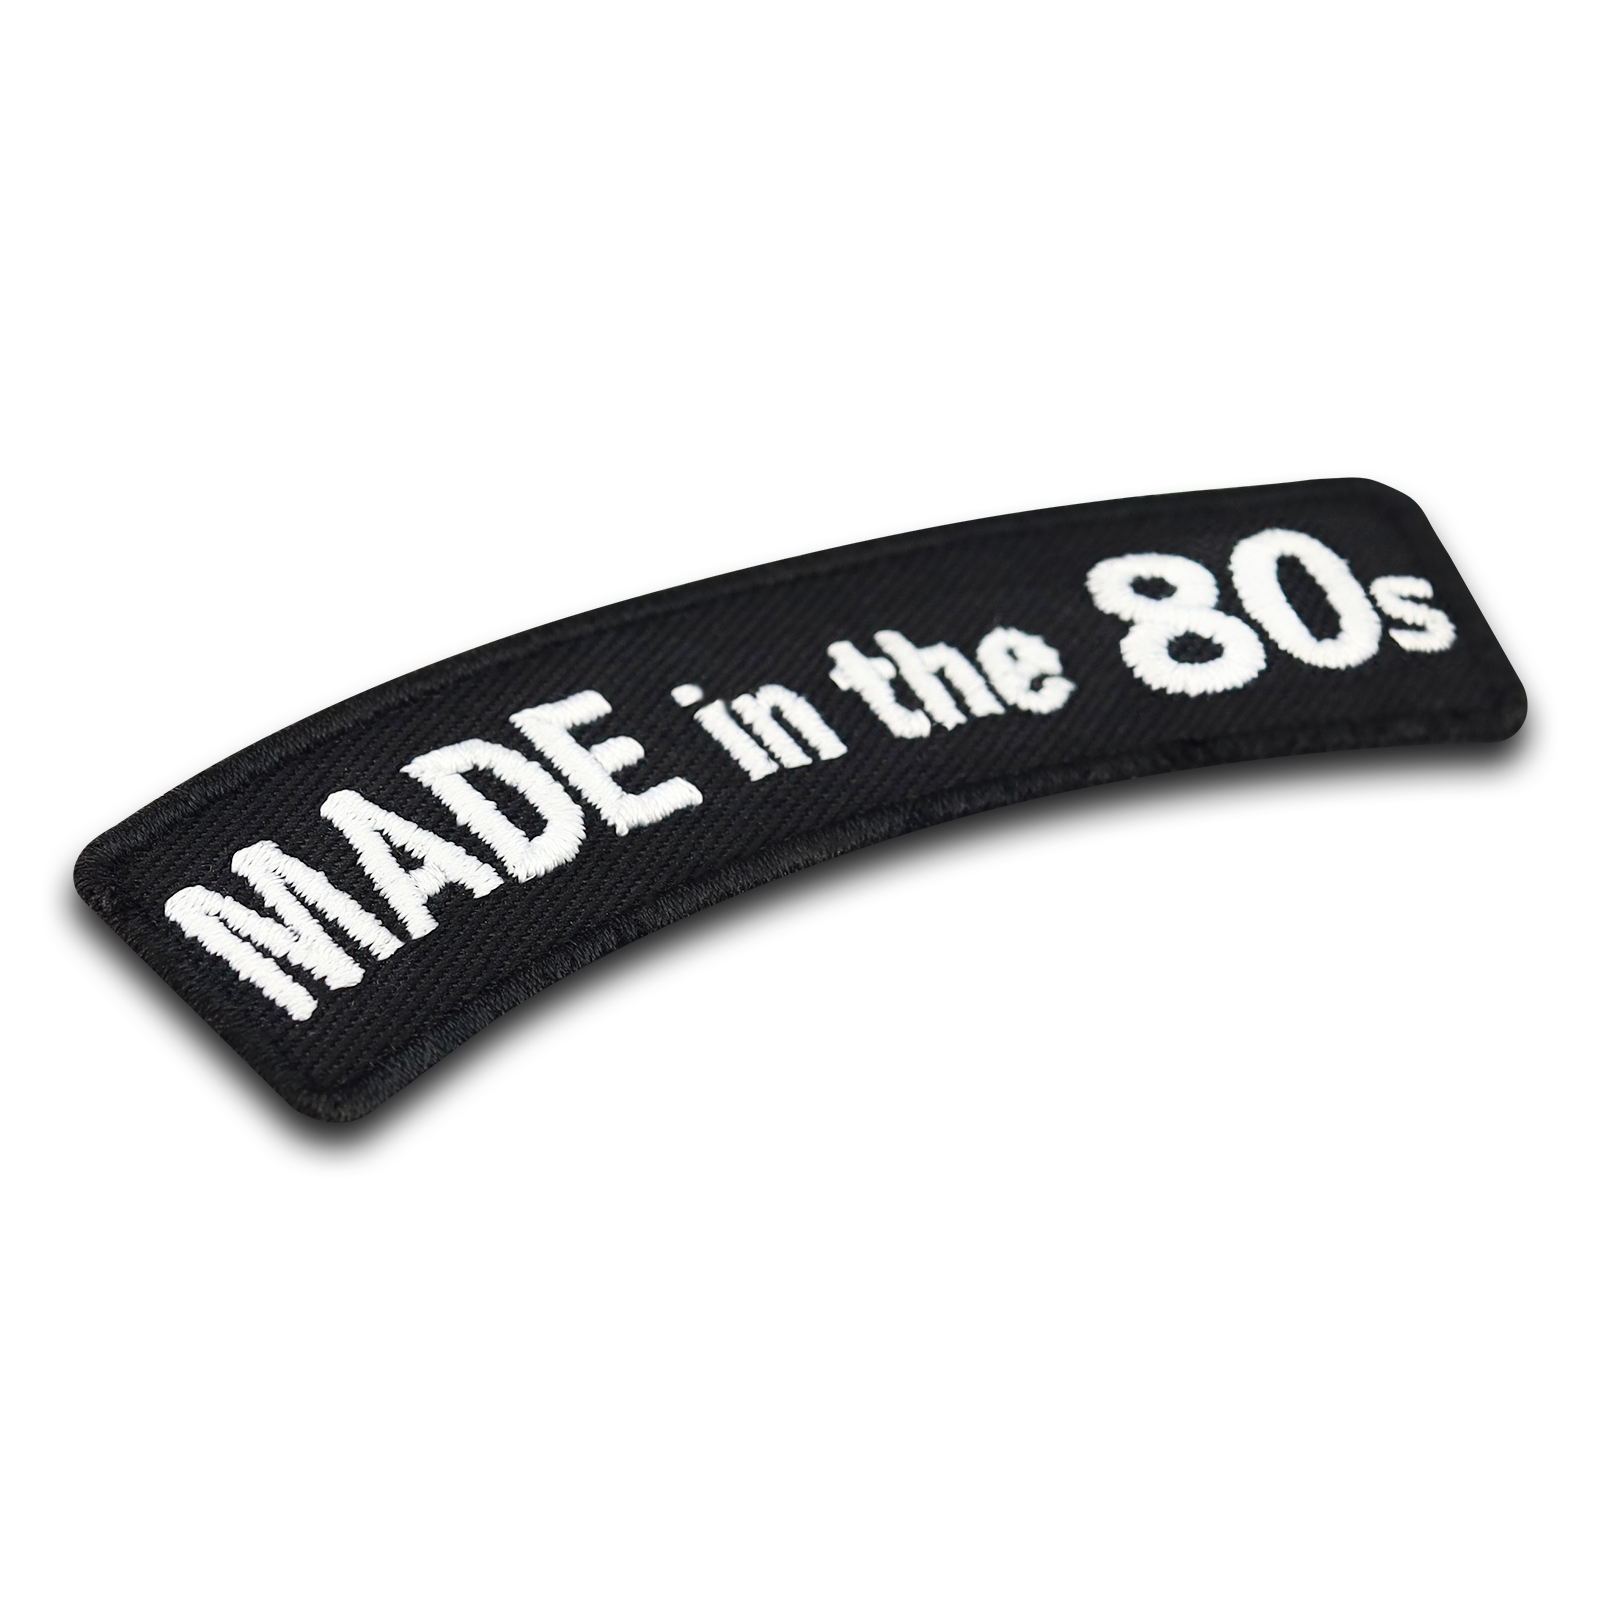 Made in the 80s - Patch